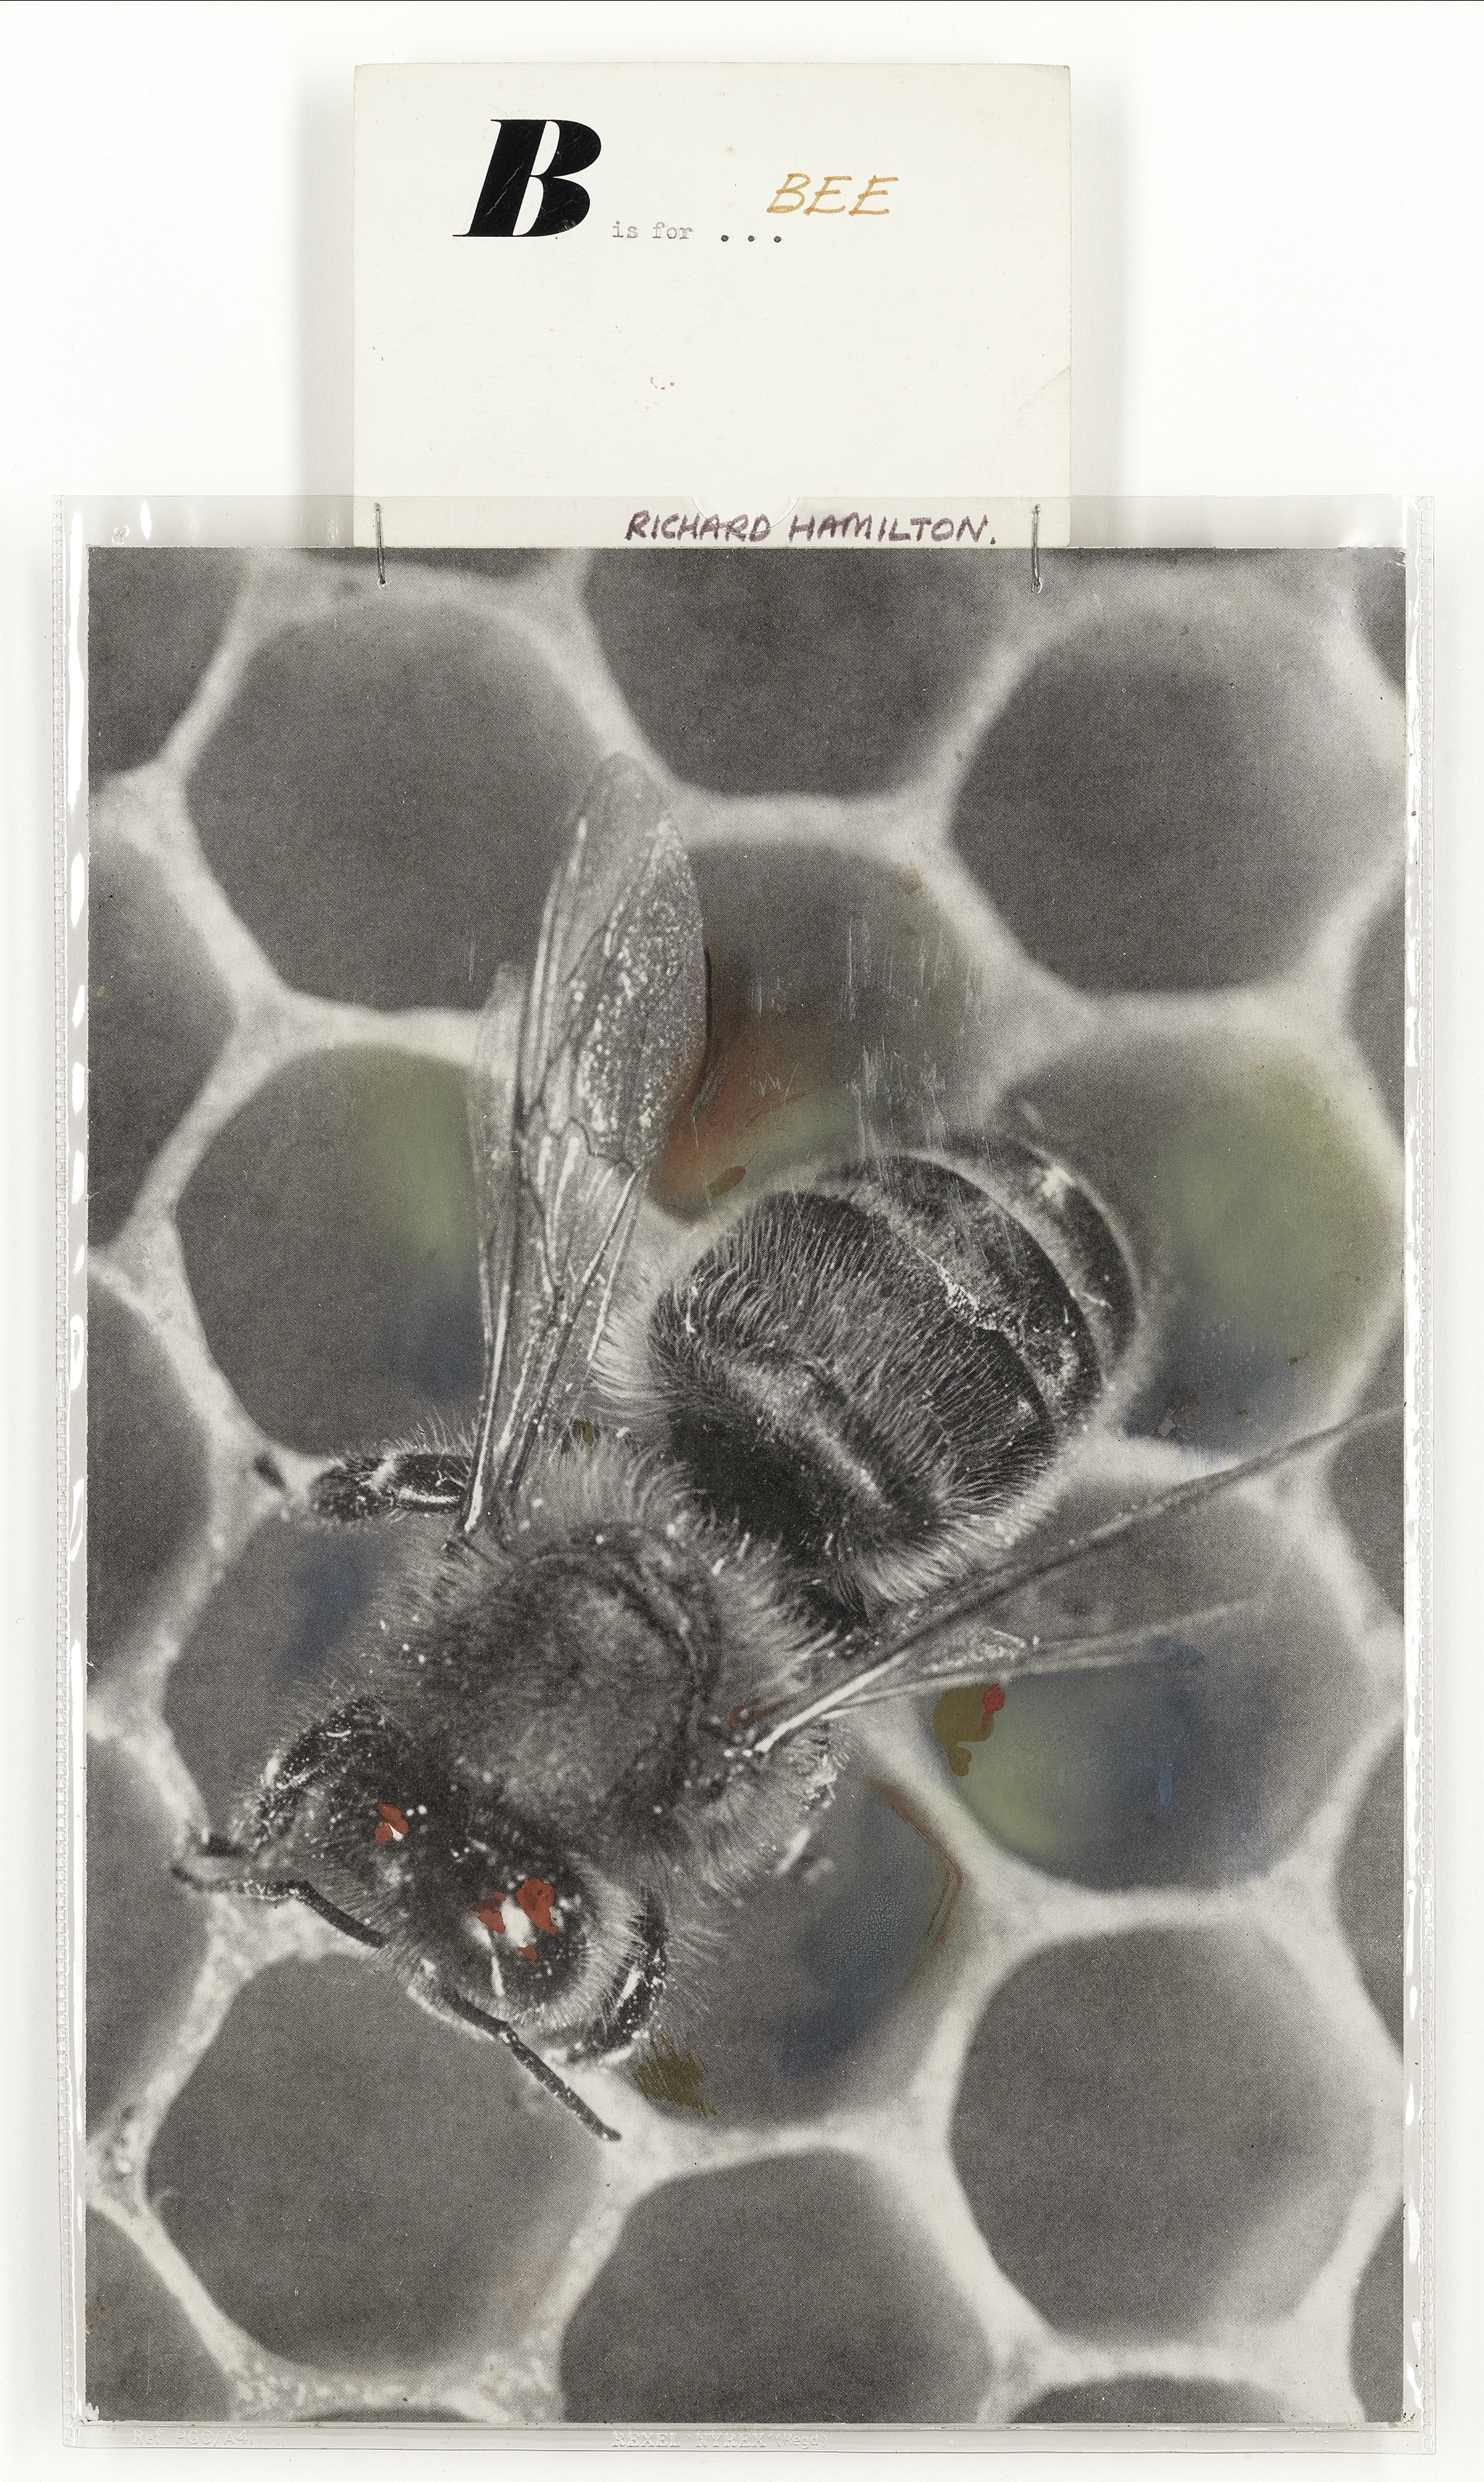 Richard Hamilton (British, 1922-2011) B is for Bee, 1967 Oil and graphite applied to offset litho...